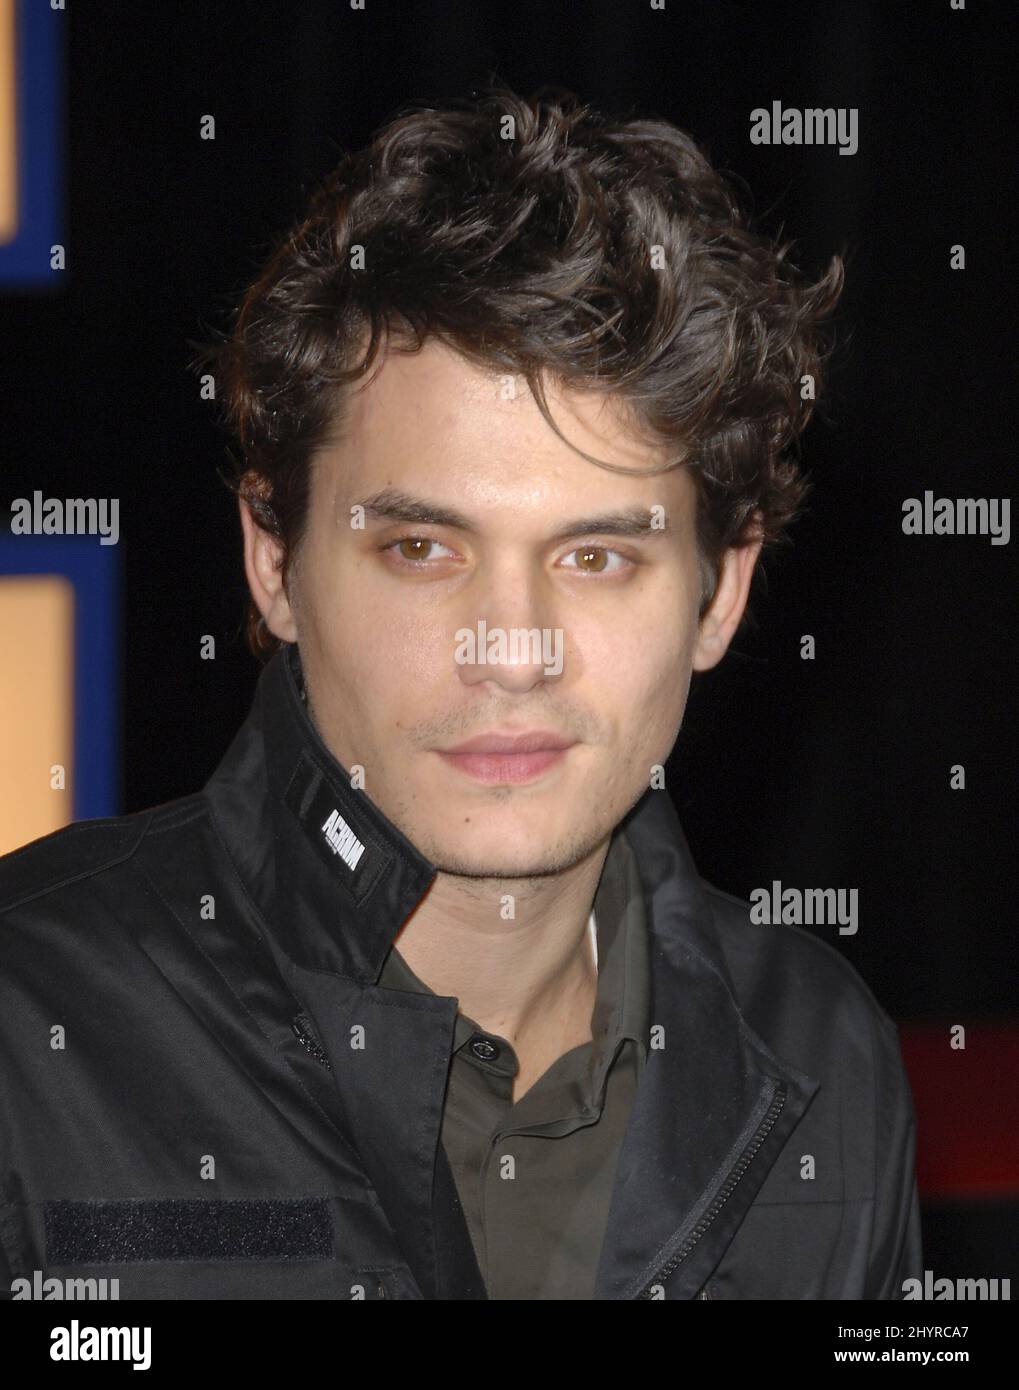 John Mayer attends the Walk Hard: The Dewey Cox Story Premiere at the Grauman's Chinese Theatre, Los Angeles Stock Photo